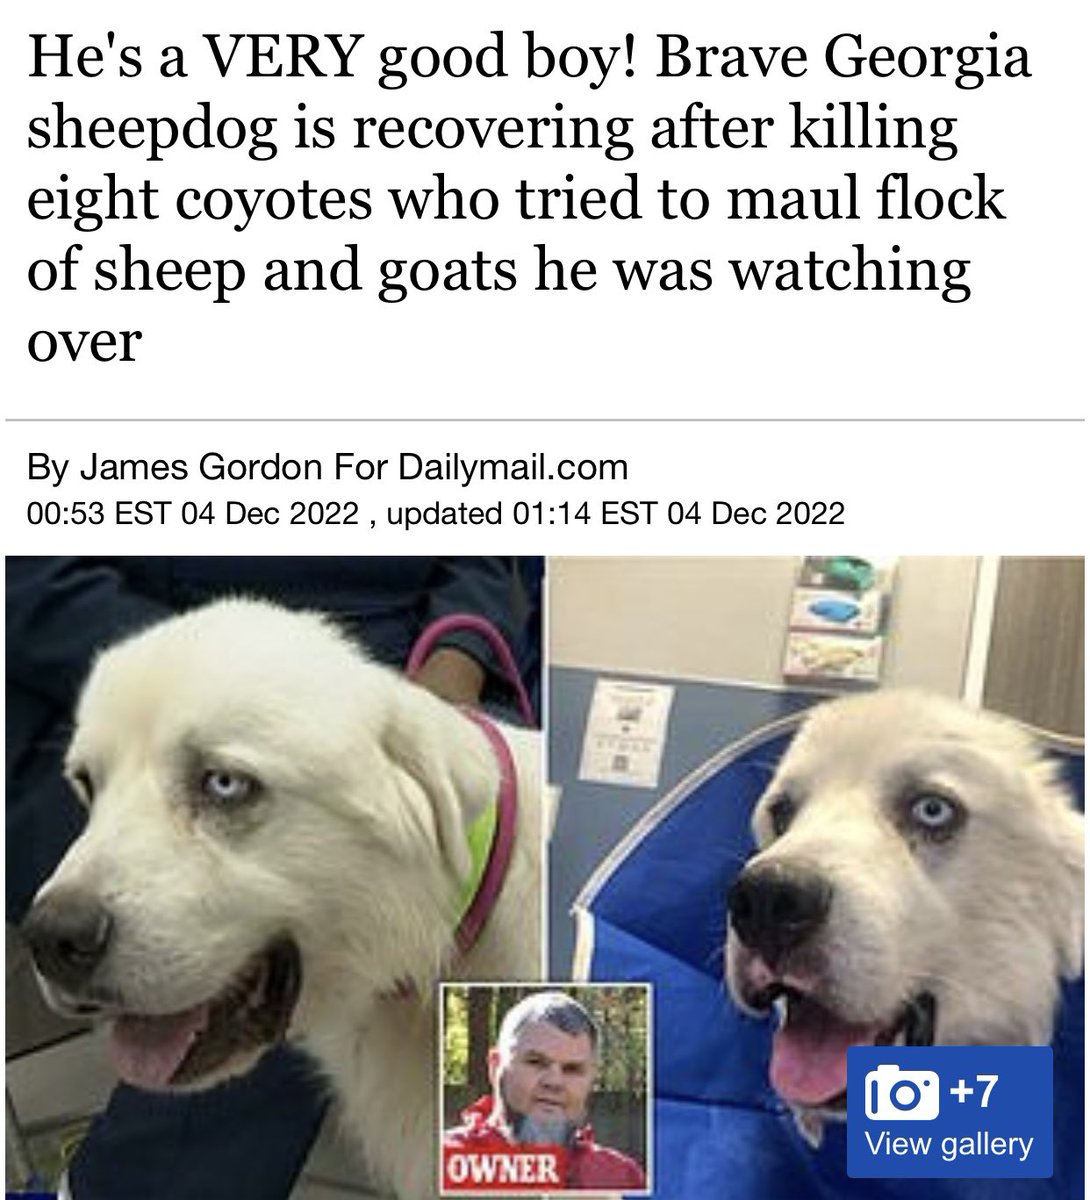 dudes posting their w's - dog - He's a Very good boy! Brave Georgia sheepdog is recovering after killing eight coyotes who tried to maul flock of sheep and goats he was watching over By James Gordon For Dailymail.com Est , updated Est Owner 10 7 View gall